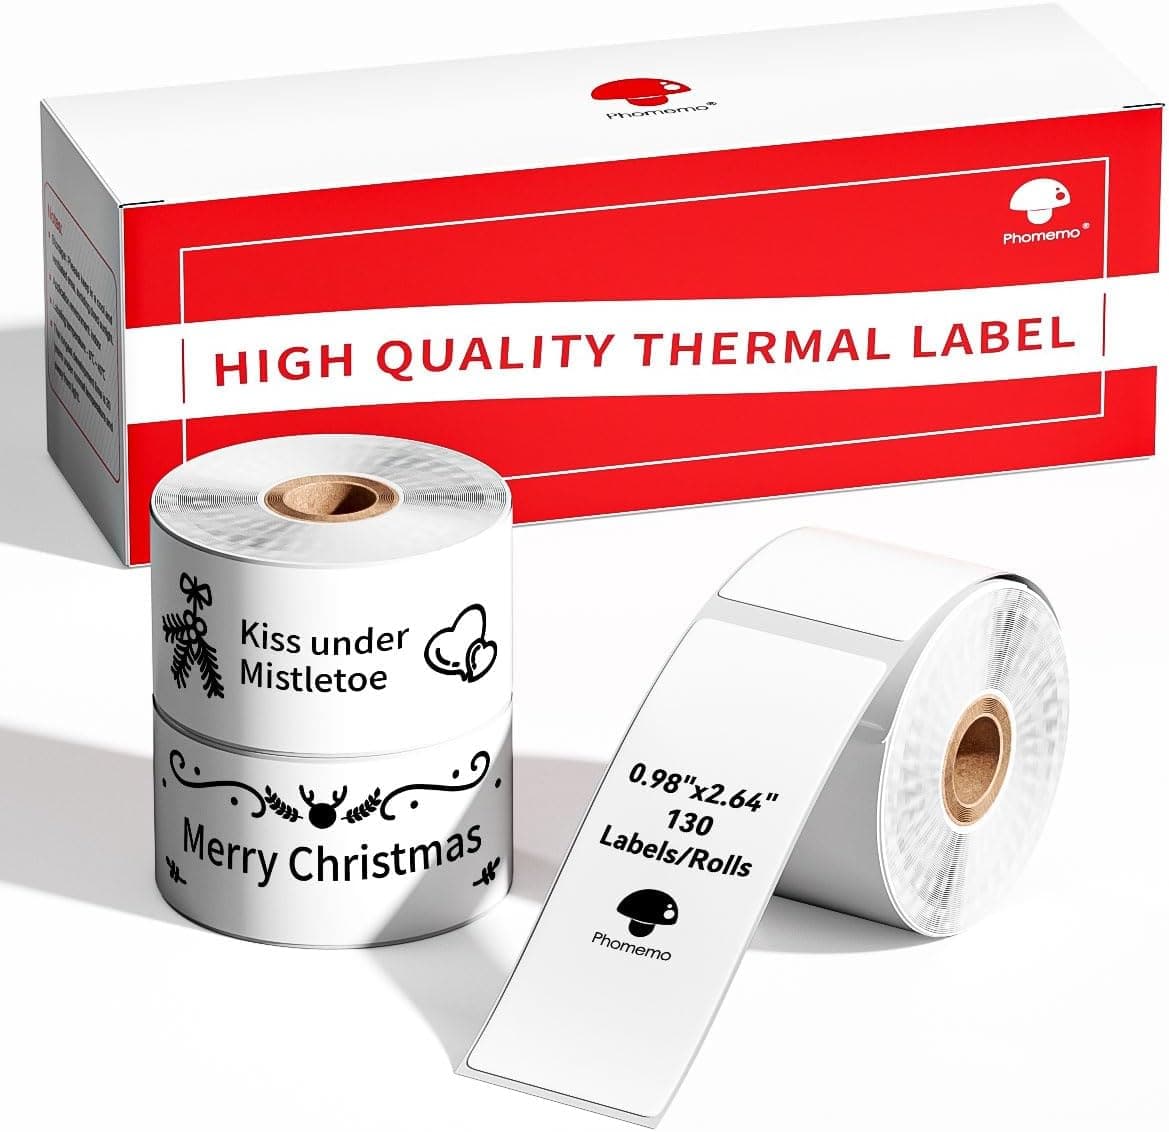 Phomemo 25x67mm Thermal Label for M110/M221/M220/M120/M200-3 Rolls